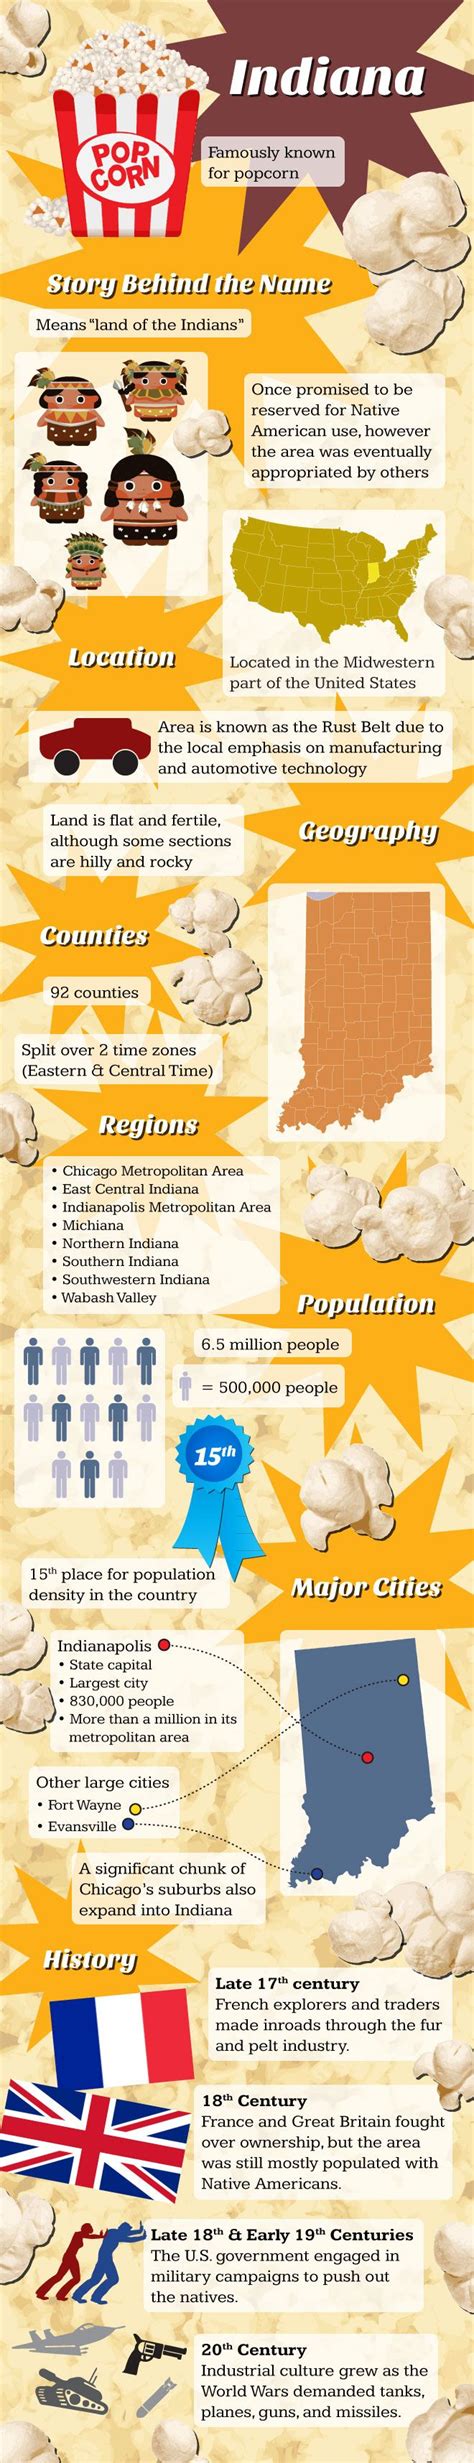 Infographic On Indiana Facts Indiana Facts Indiana Indiana State